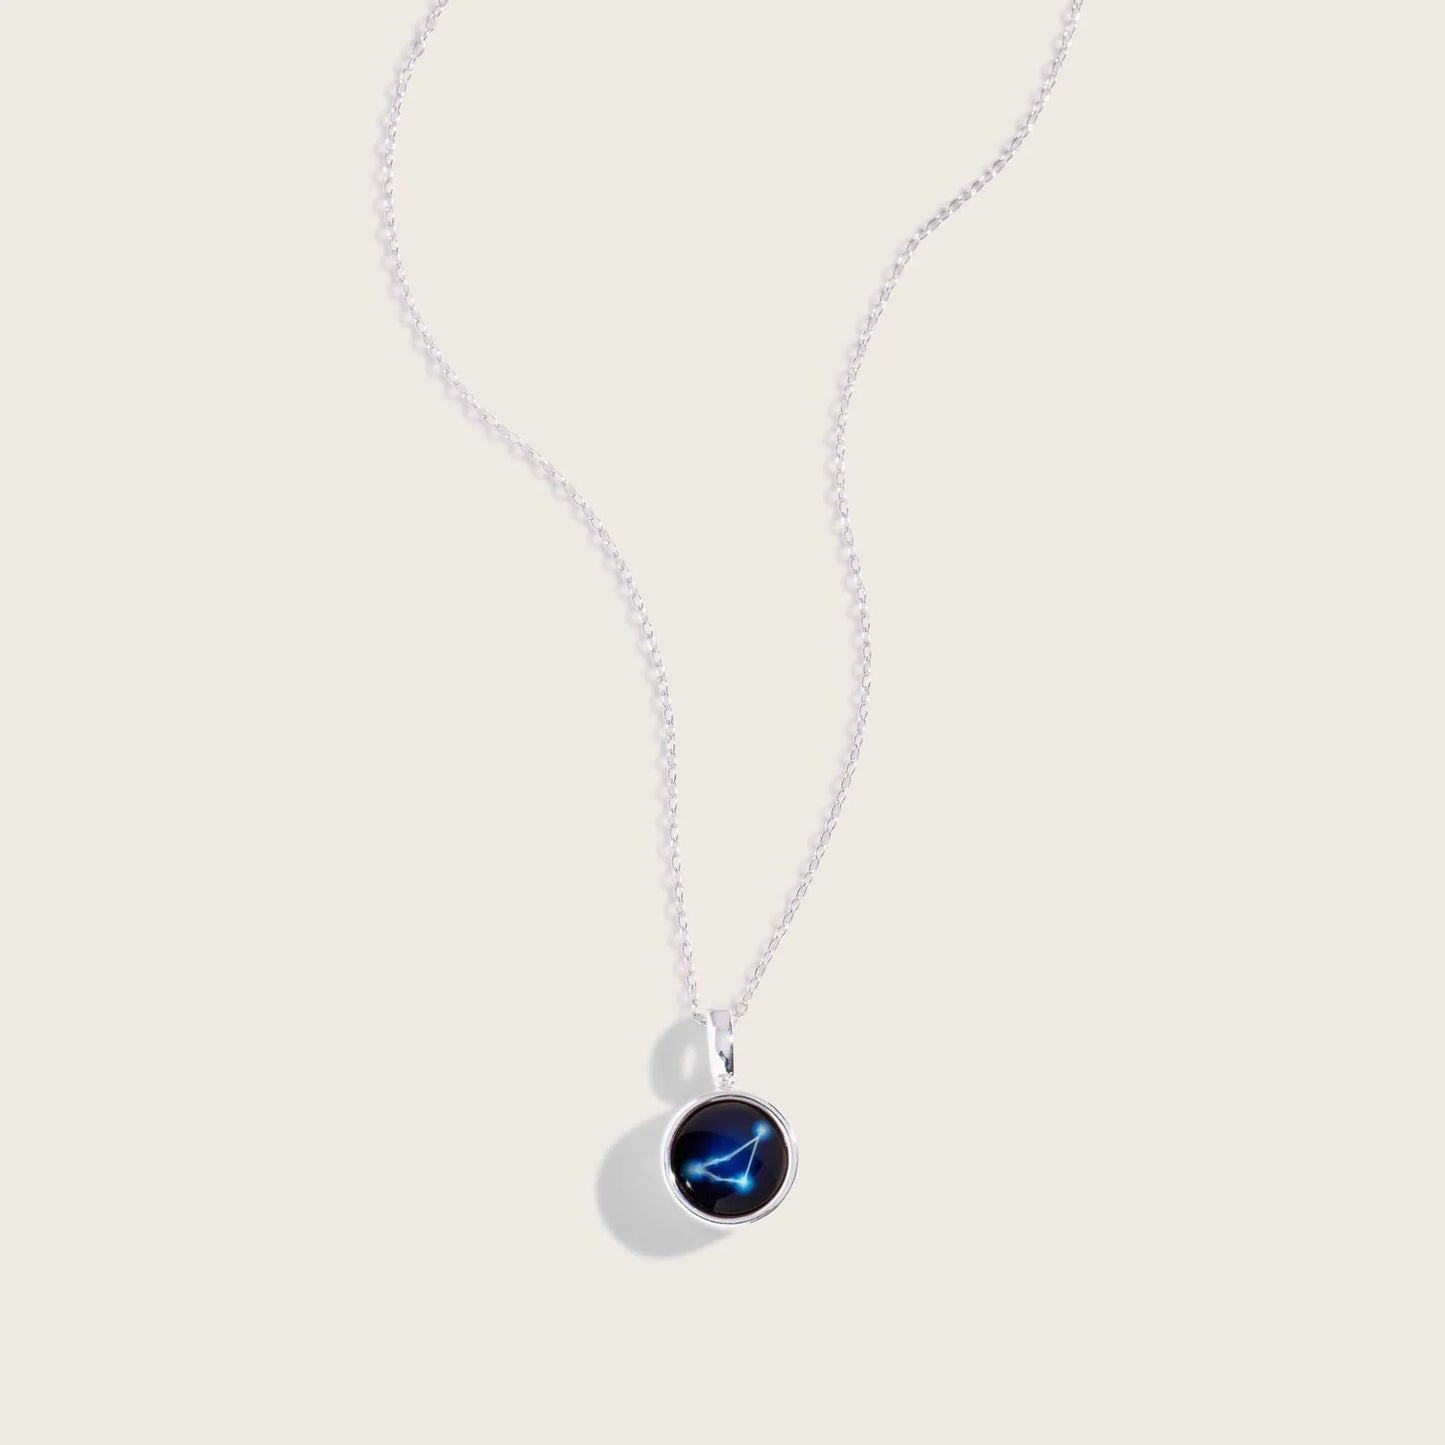 The Astral Sky Light Necklace in Silver